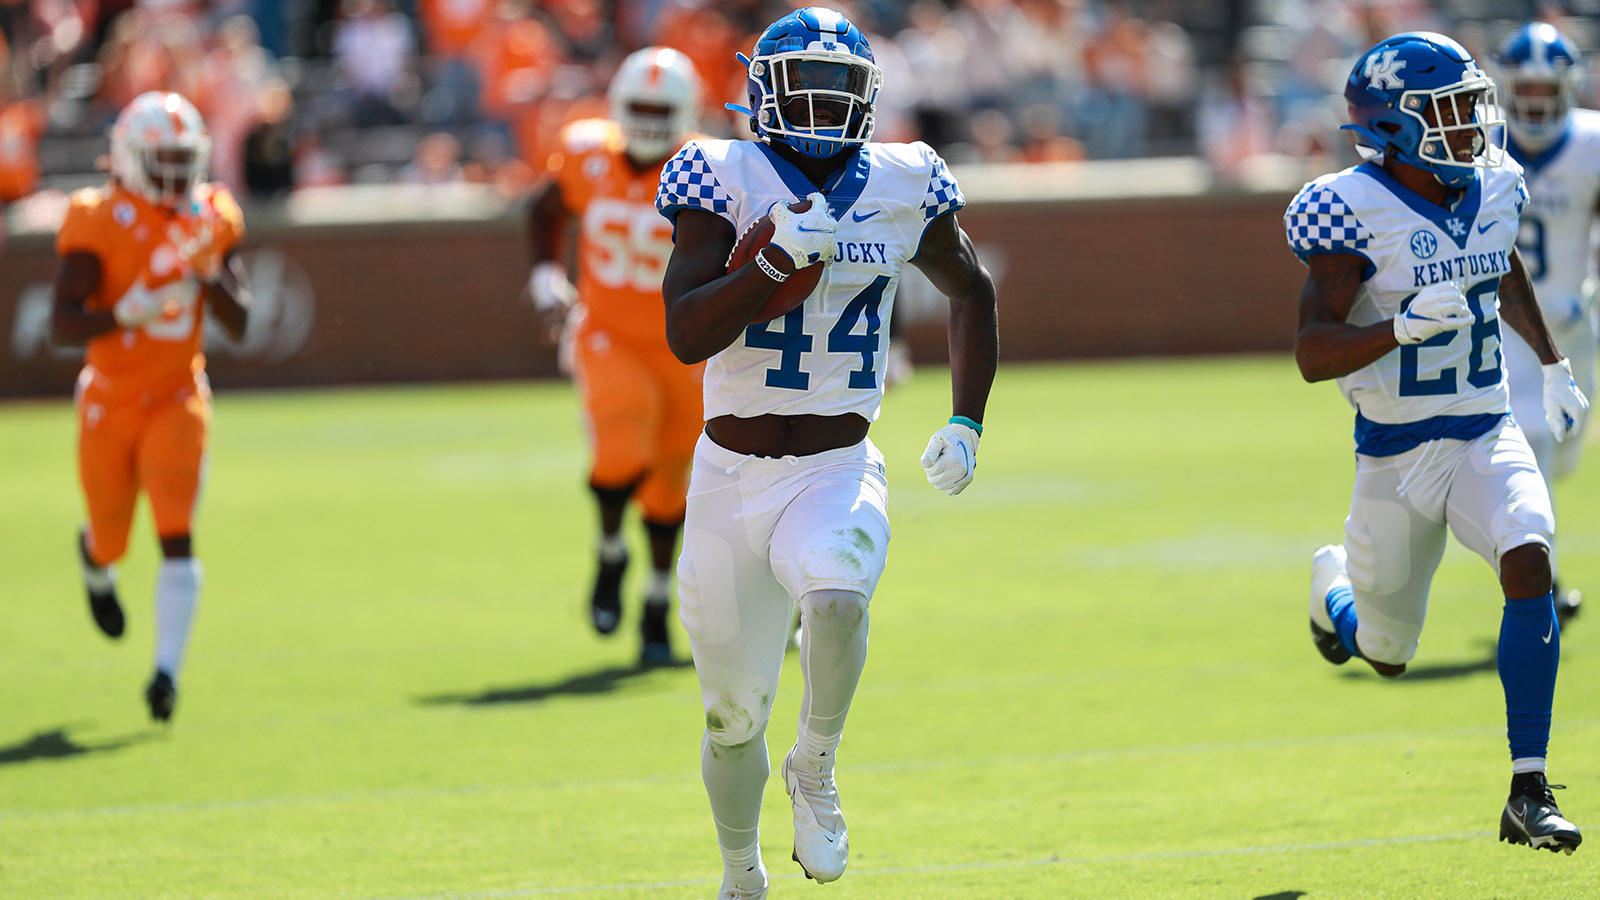 Rocky Topped! Kentucky Blasts Tennessee, 34-7